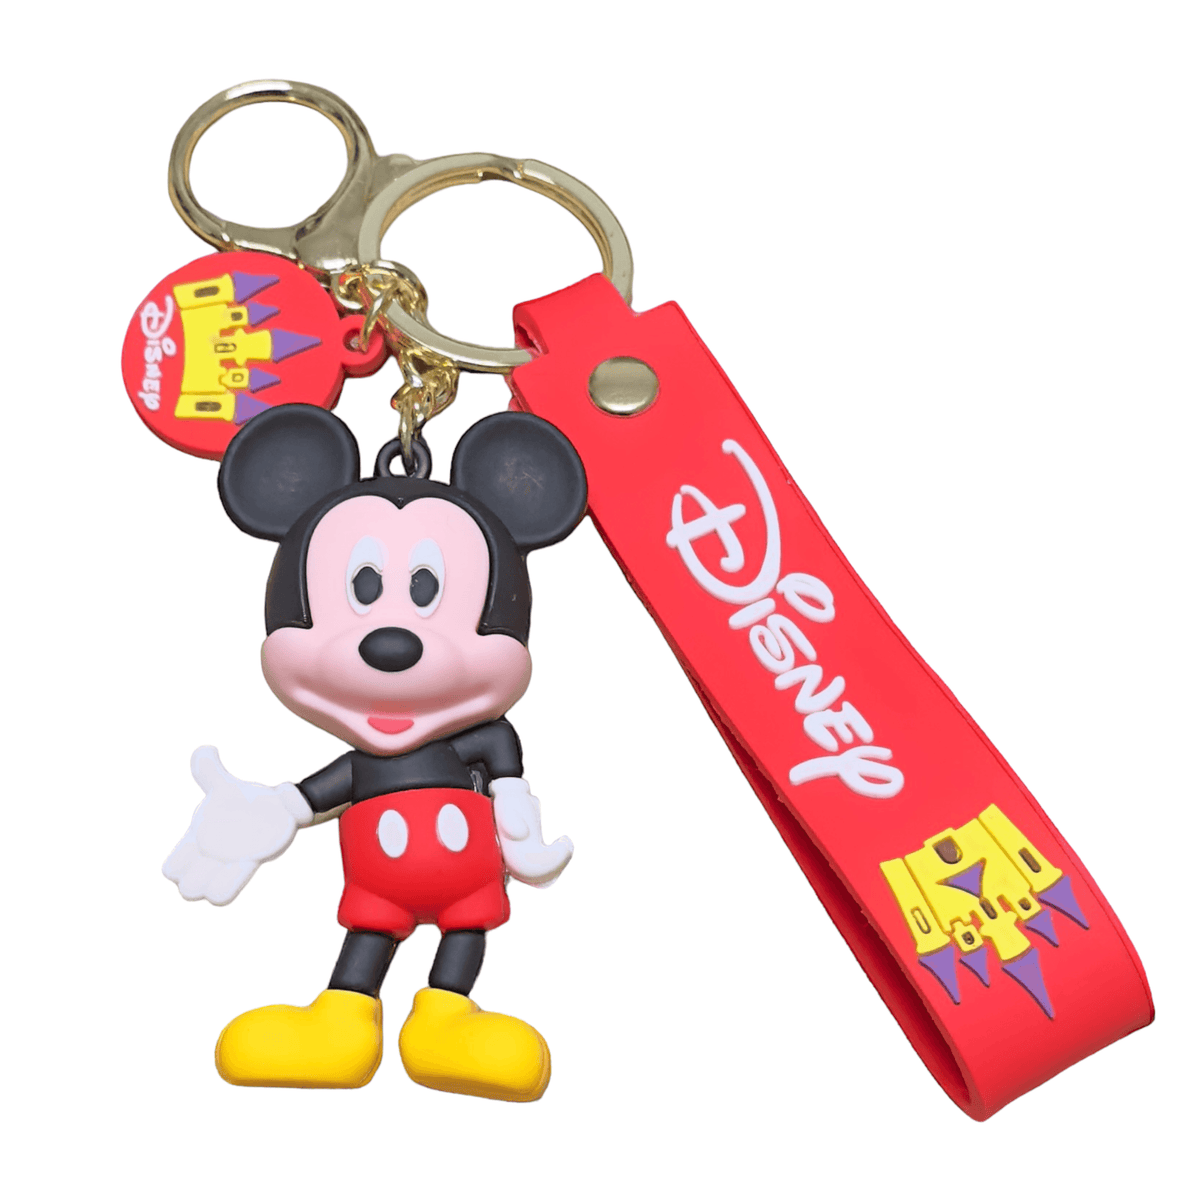 Porta-Chaves Disney - Mickey Mouse - Capsule.pt